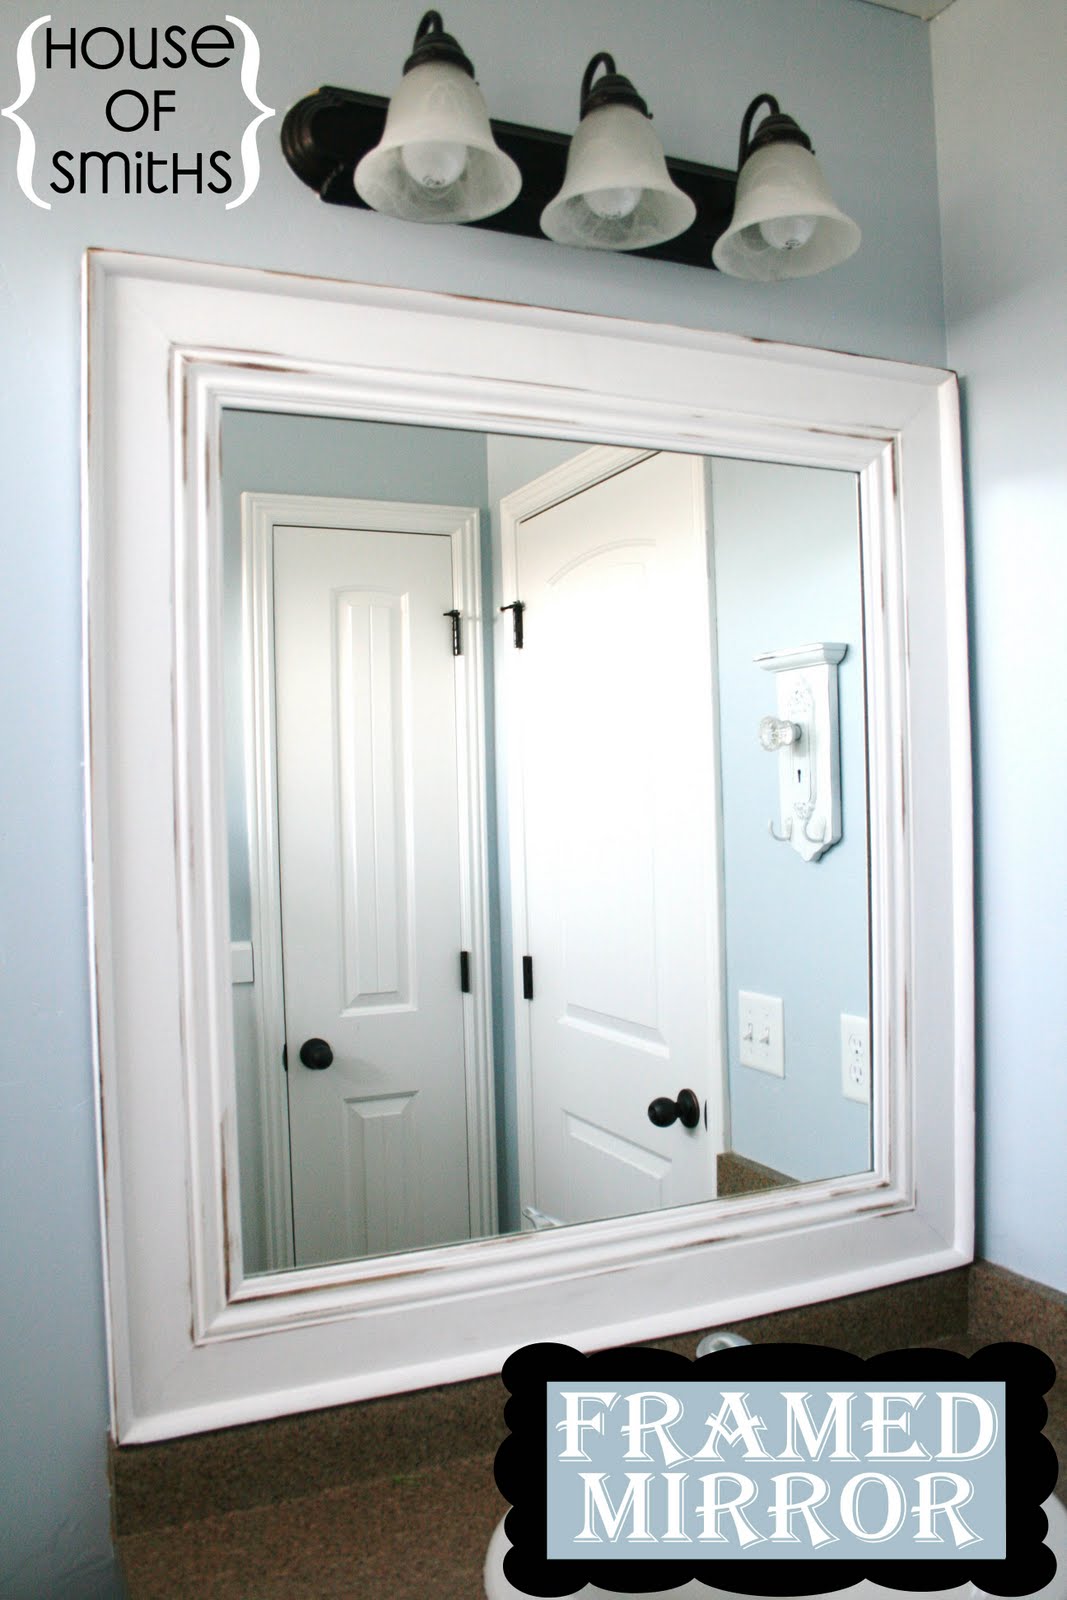 Ideas on how to cut this mirror to fit the frame : r/howto